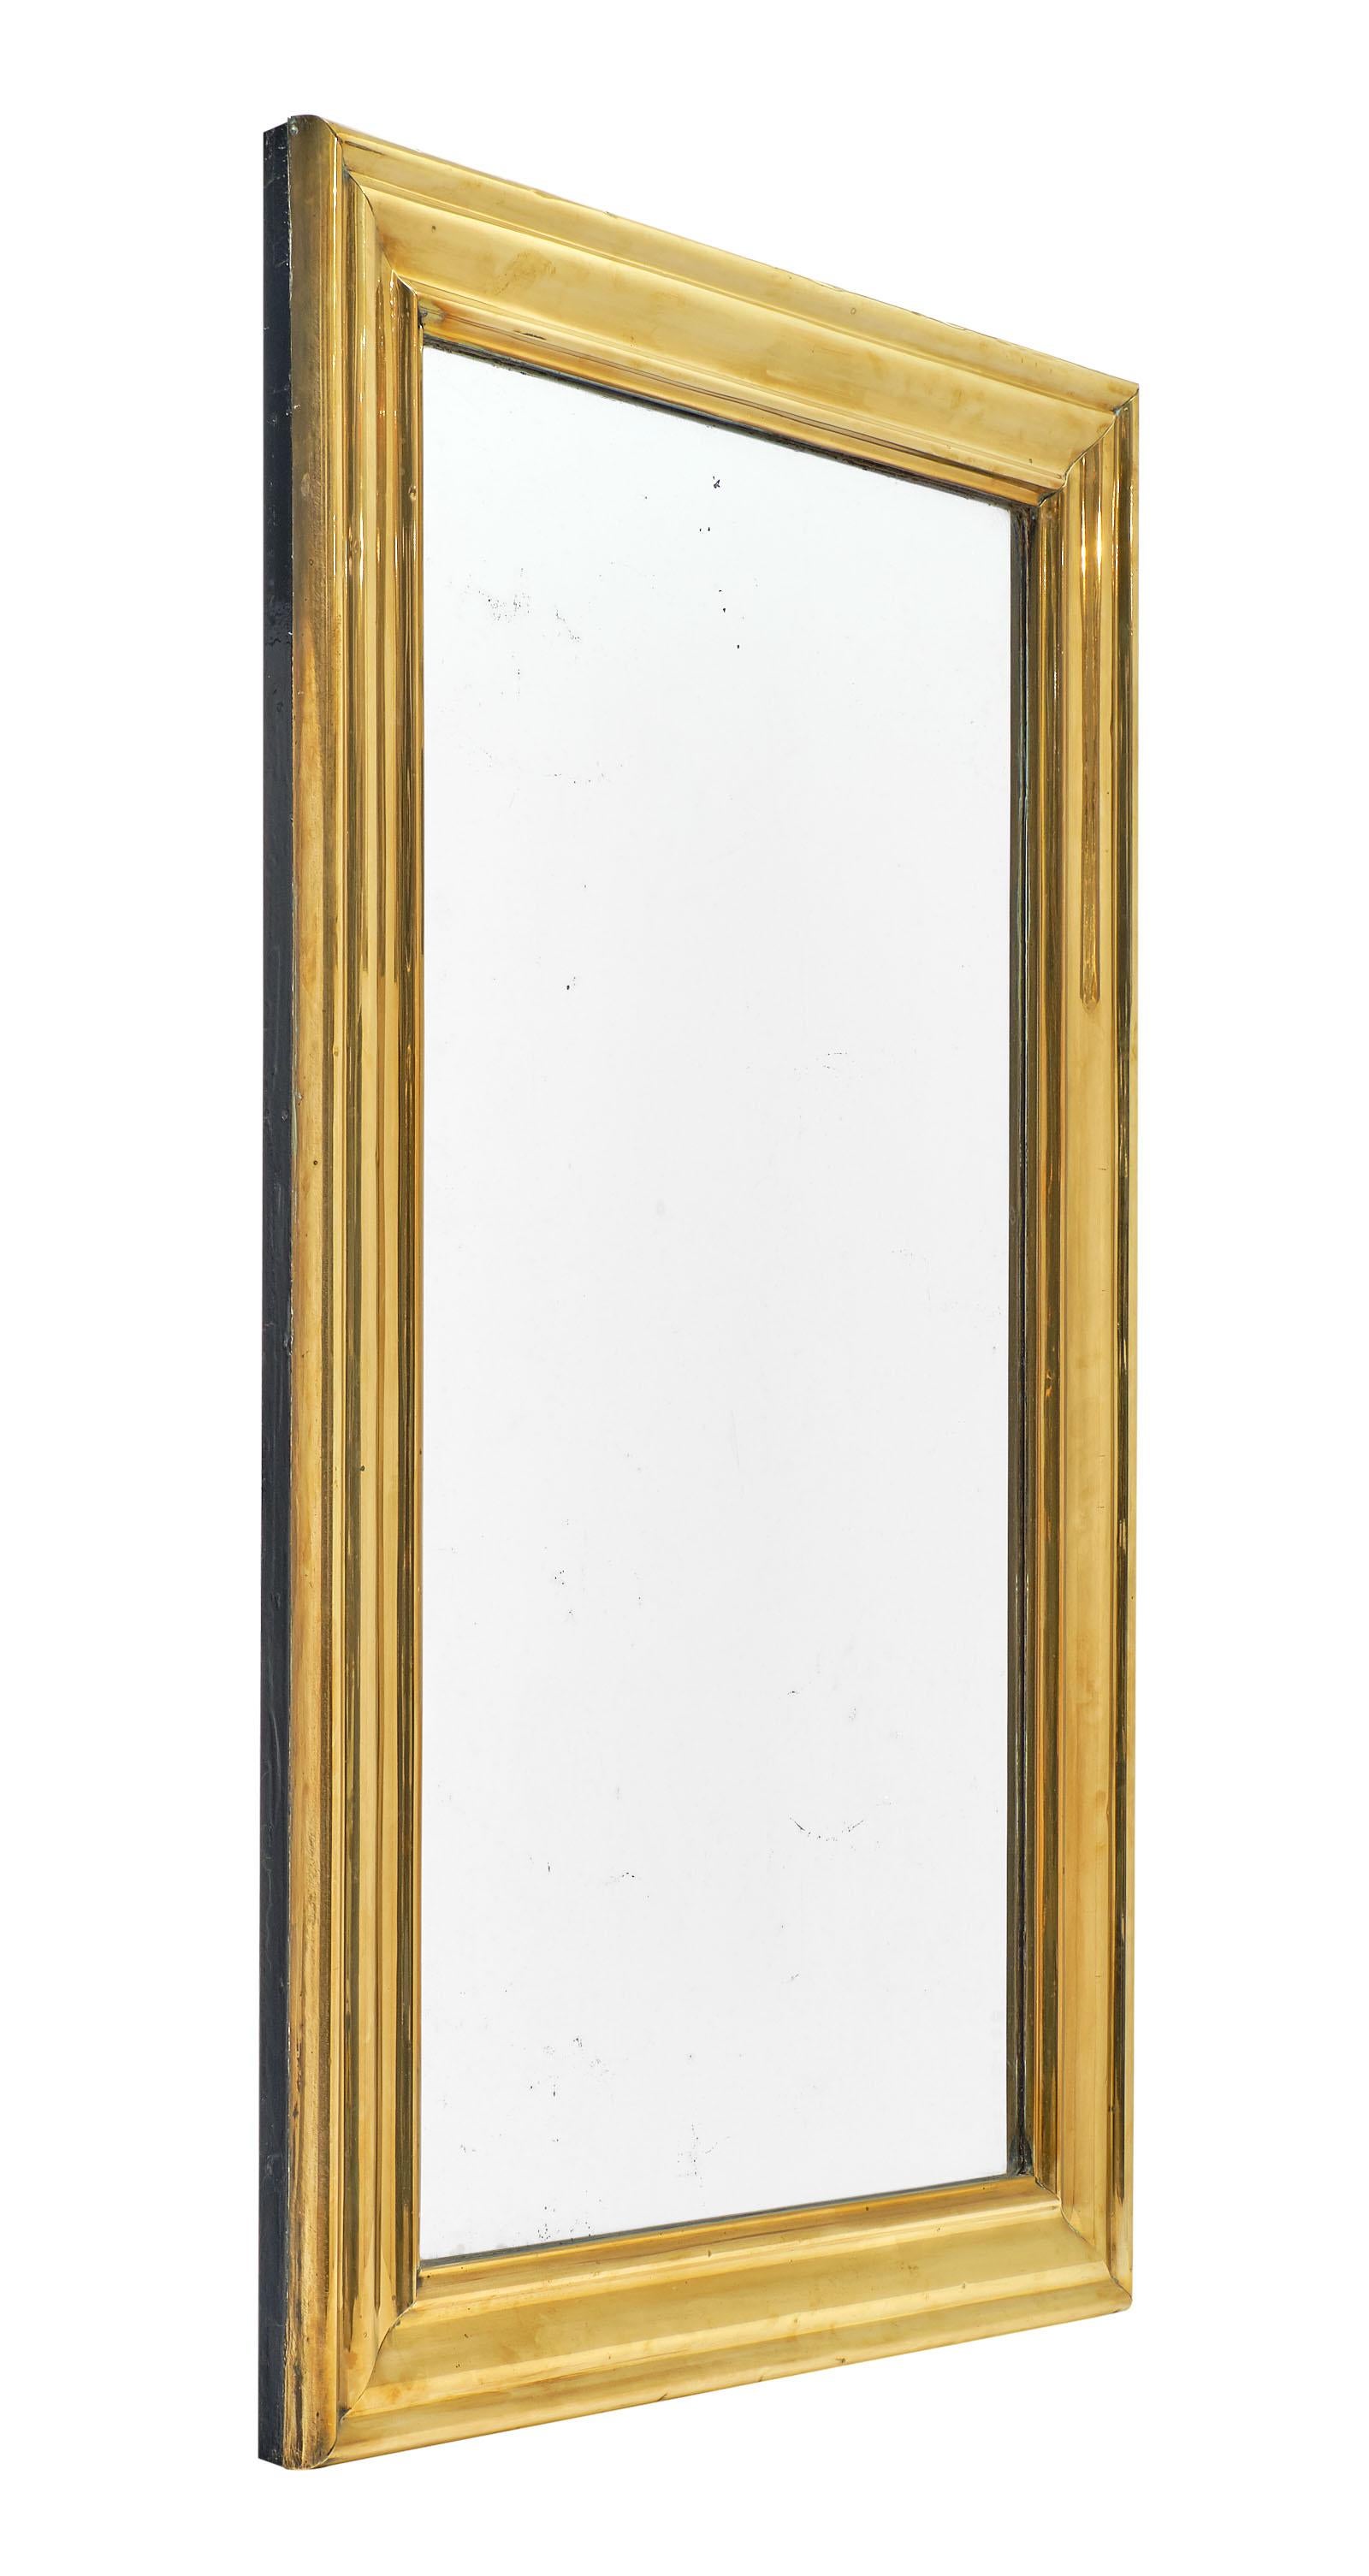 French Napoleon III mirror of wood with a frame lined in a sheet of molded brass. The mercury mirror is intact and original.